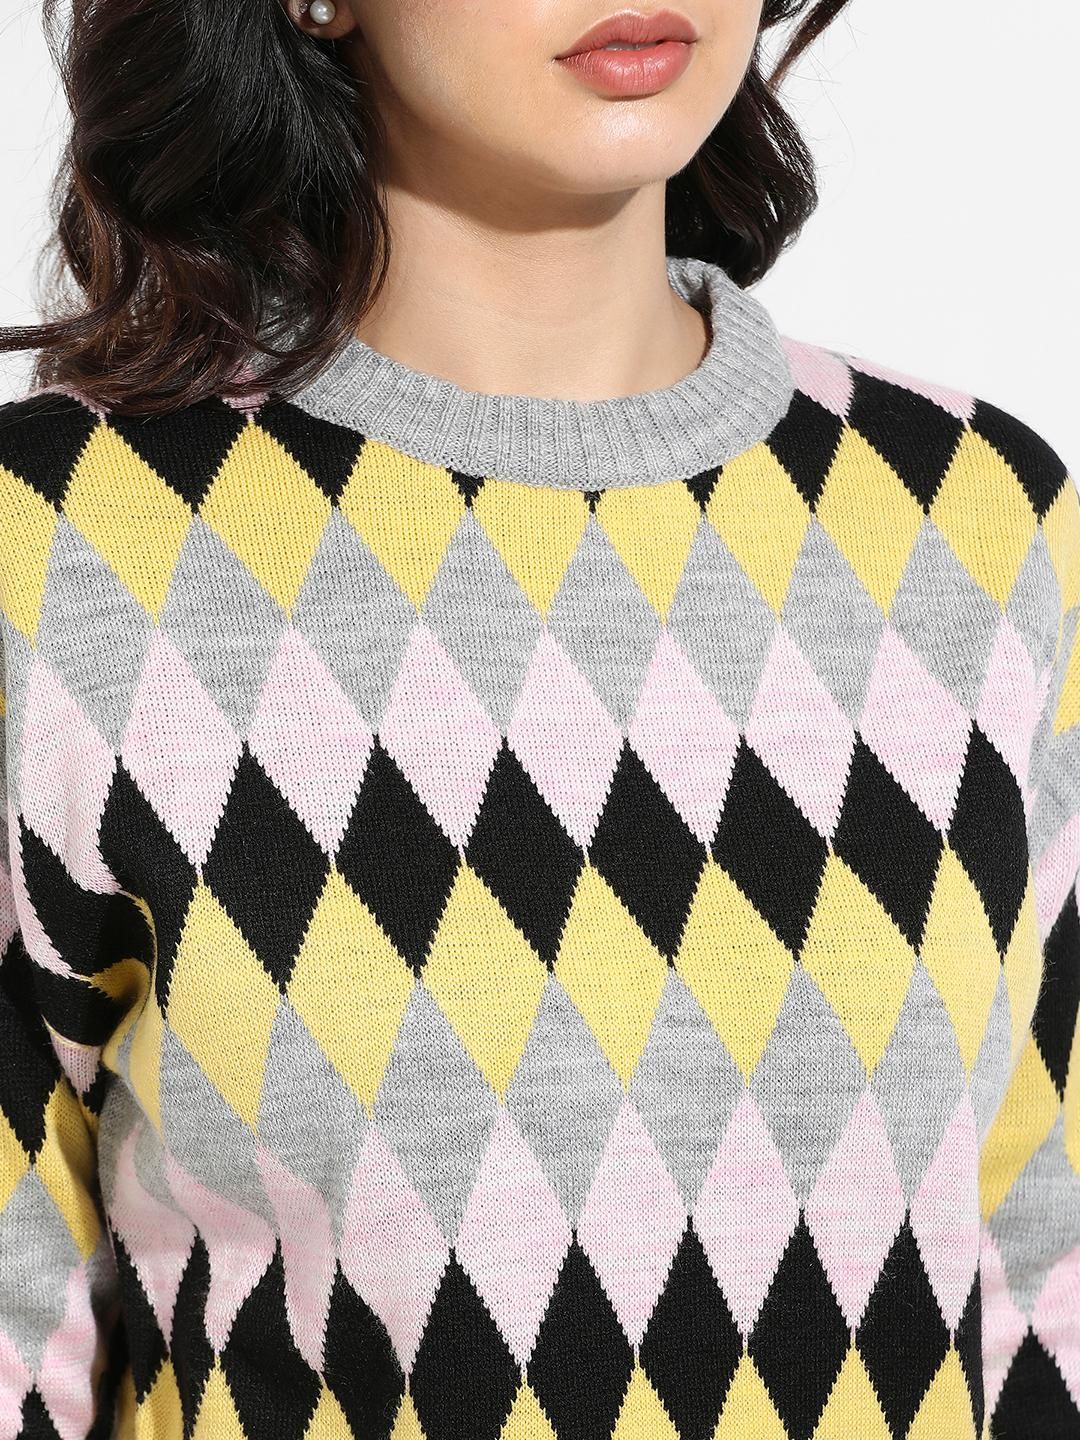 Campus Sutra Women's Argyle Knitted Pullover Sweater 